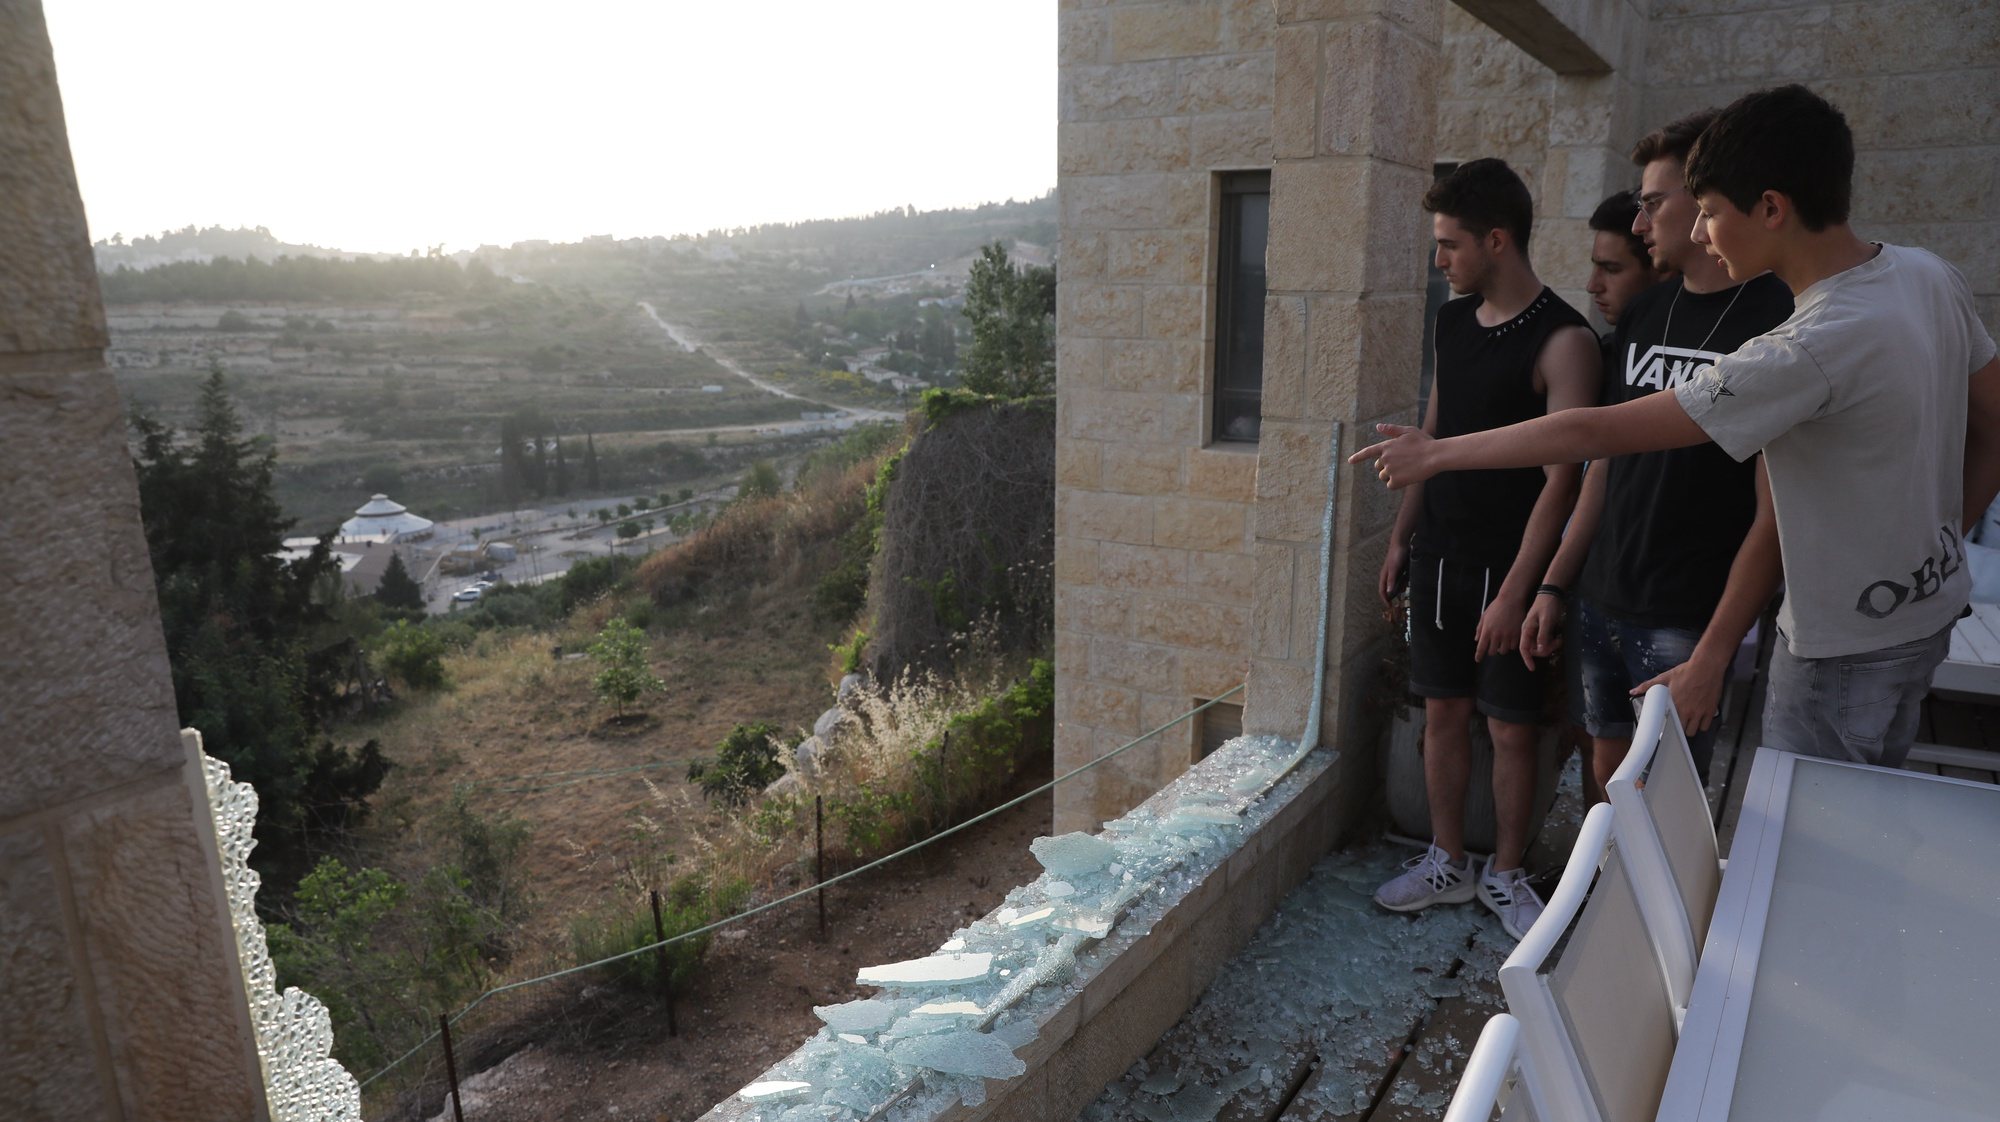 epa09189820 Israelis look out from a broken window in their home, as a result from missile fired from Gaza Strip, at the village of Beit Nekufa near Jerusalem, Israel, 10 May 2021 as tensions rise between Israel and Palestinians.  EPA/ABIR SULTAN